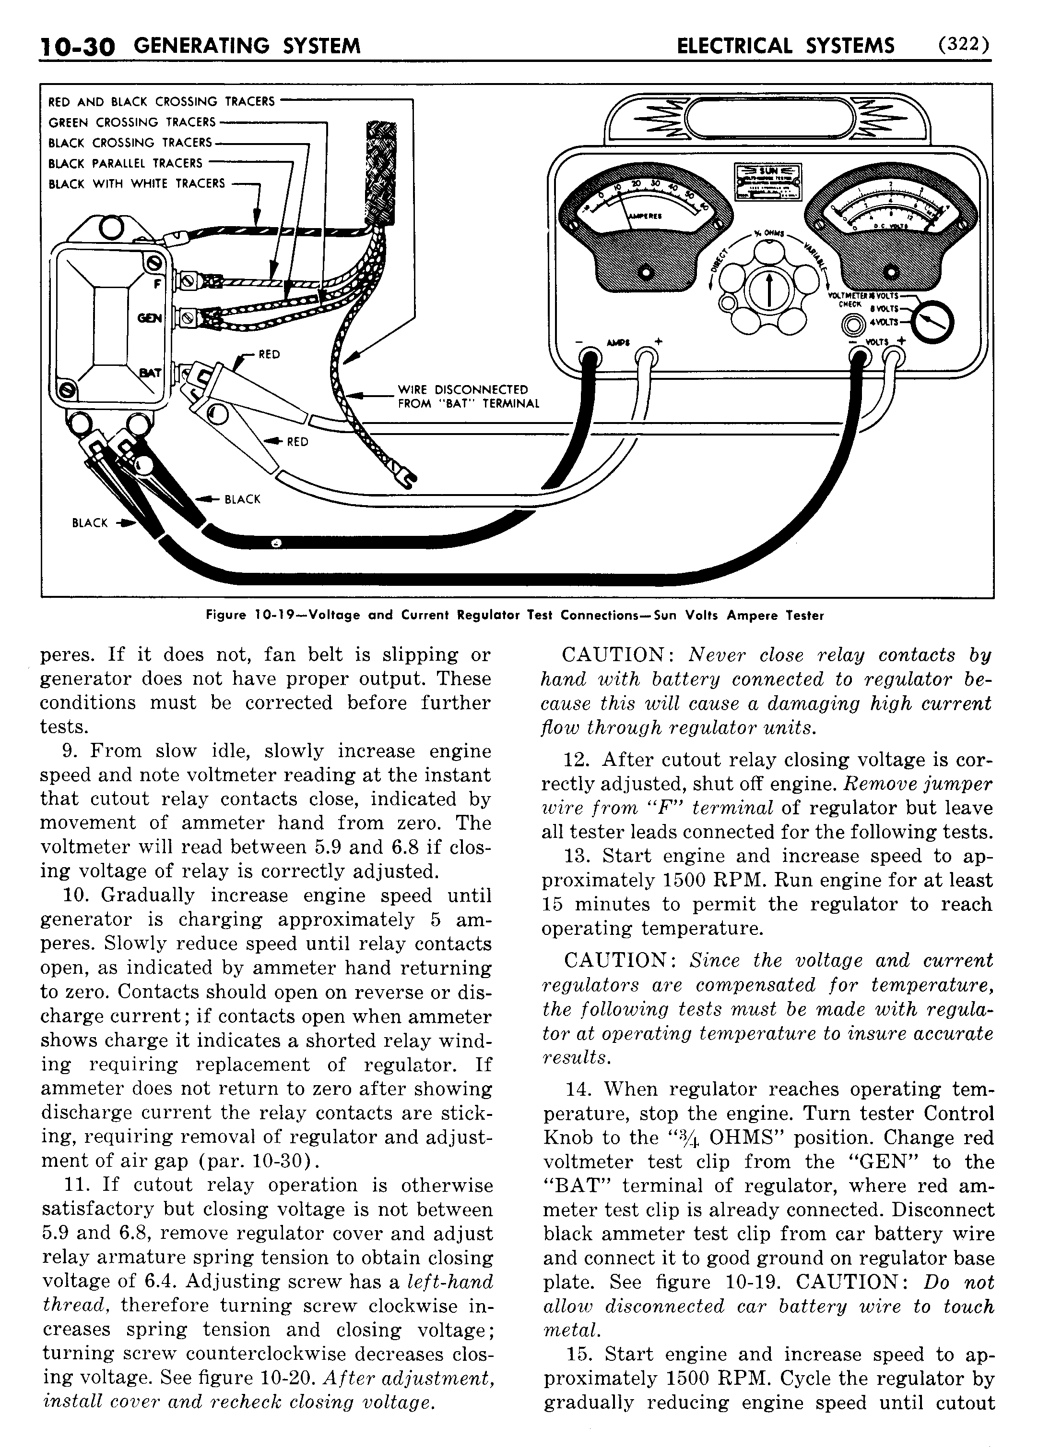 n_11 1951 Buick Shop Manual - Electrical Systems-030-030.jpg